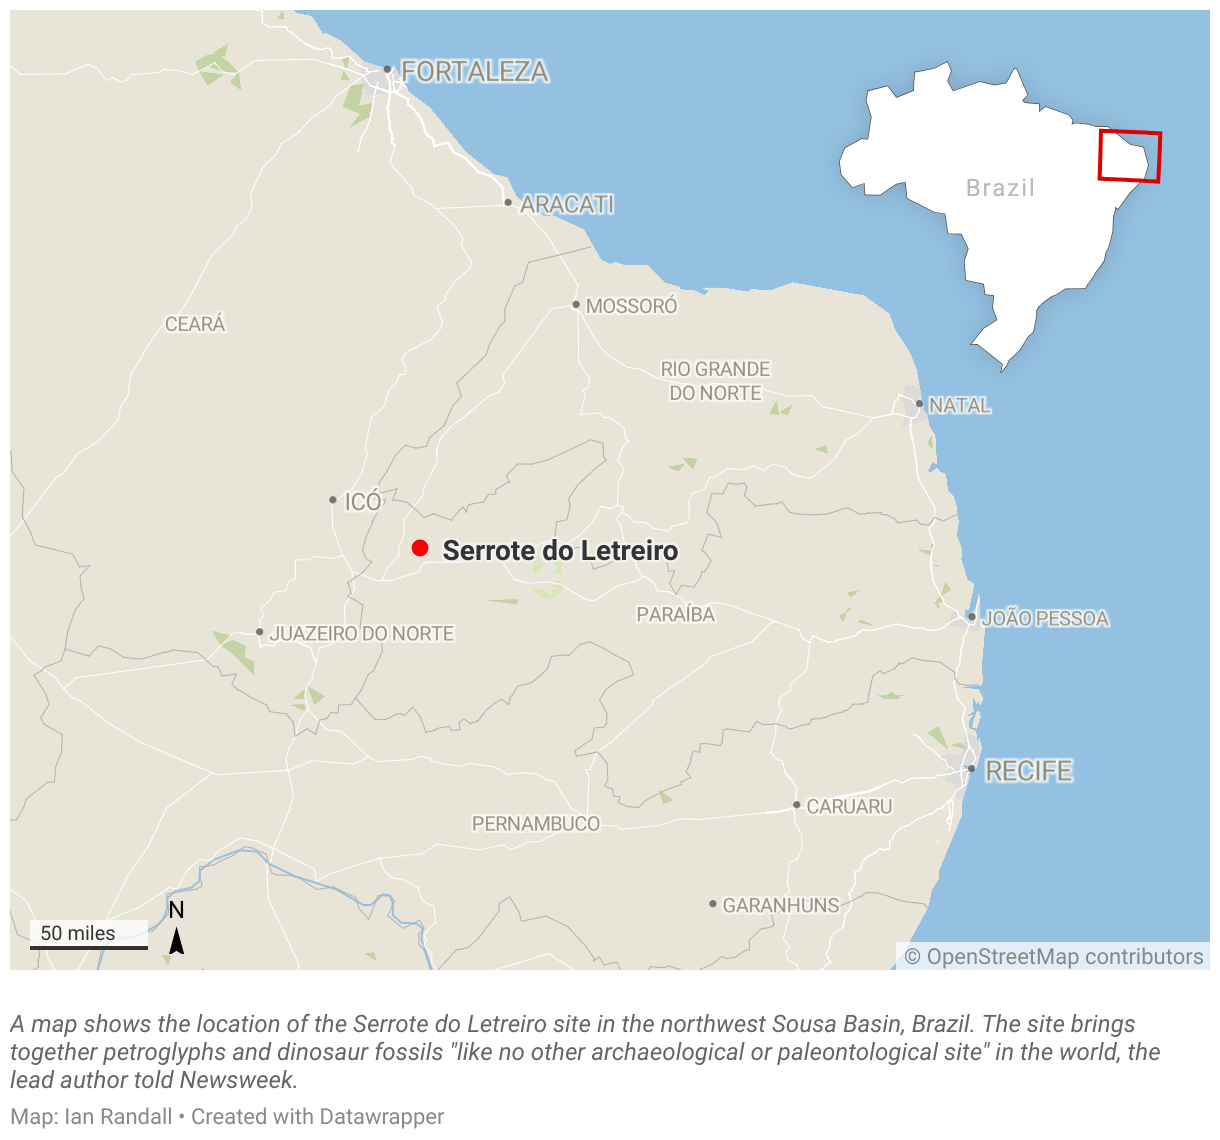 A map shows the location of the Serrote do Letreiro site in the northwest Sousa Basin, Brazil.